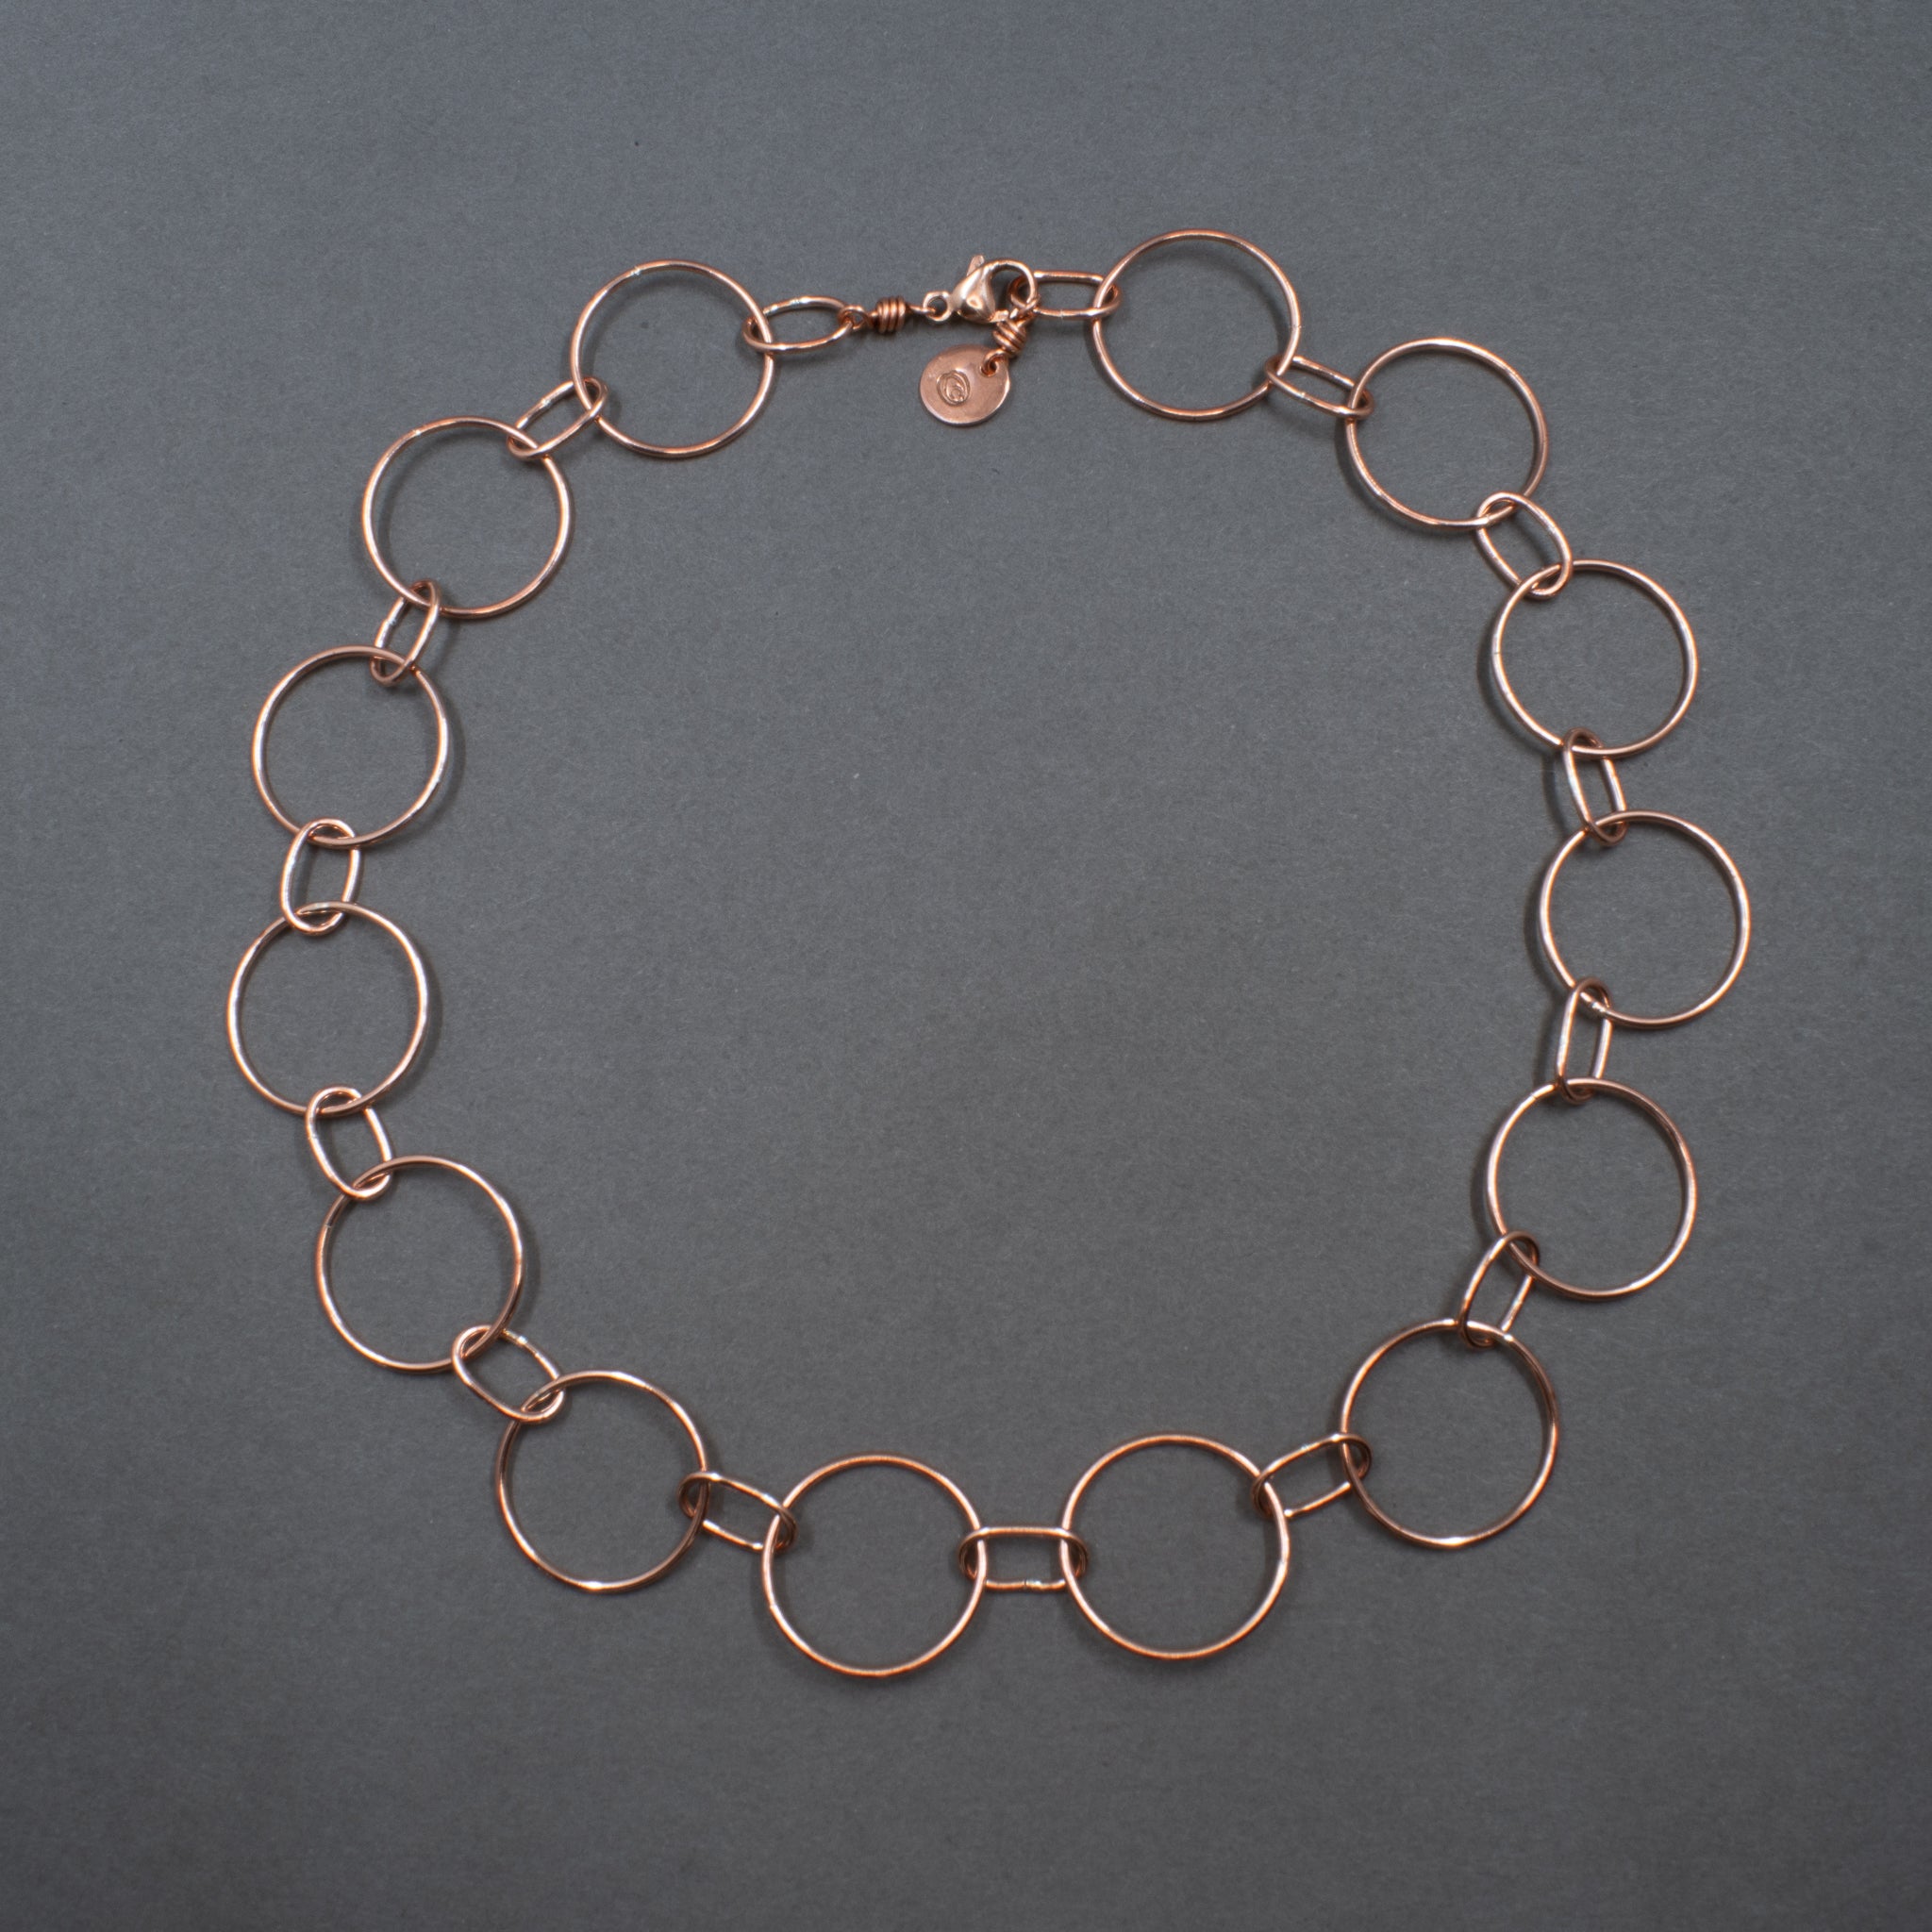 Chain Necklace in Copper with Large Round and Small Oval Links